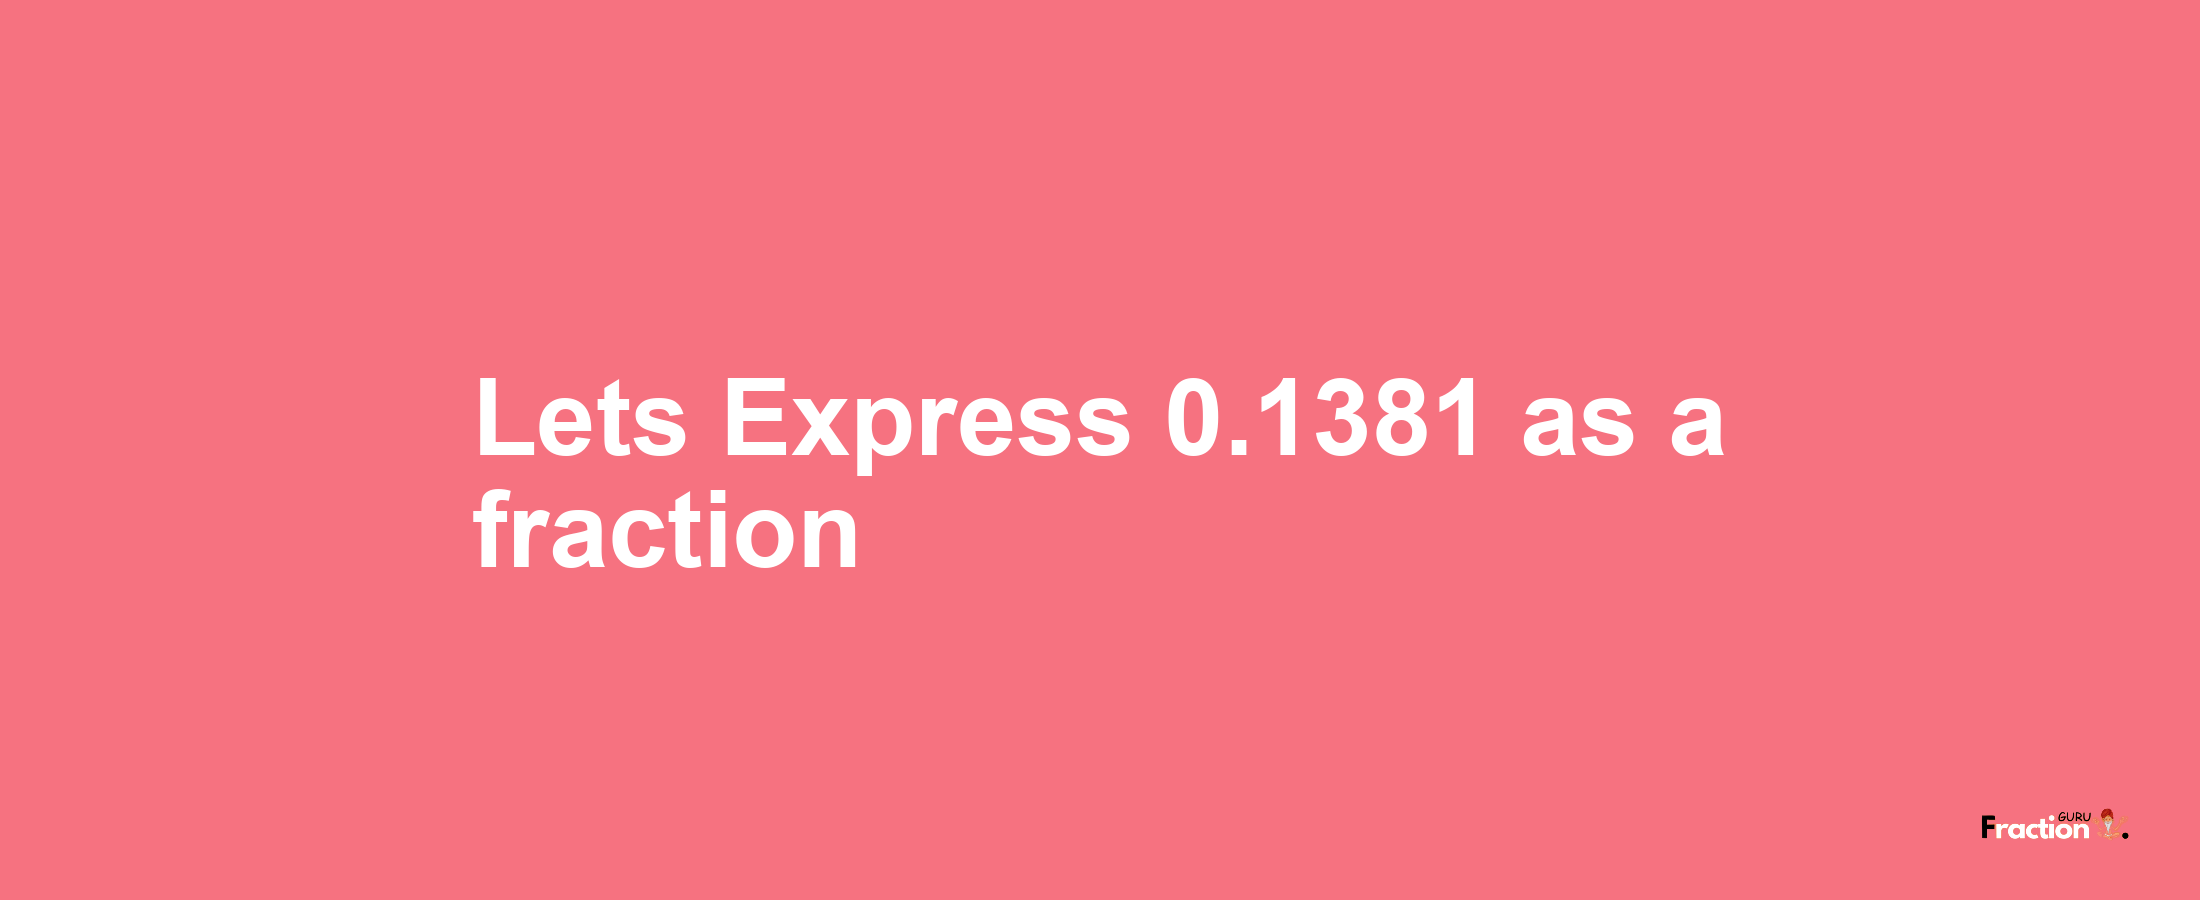 Lets Express 0.1381 as afraction